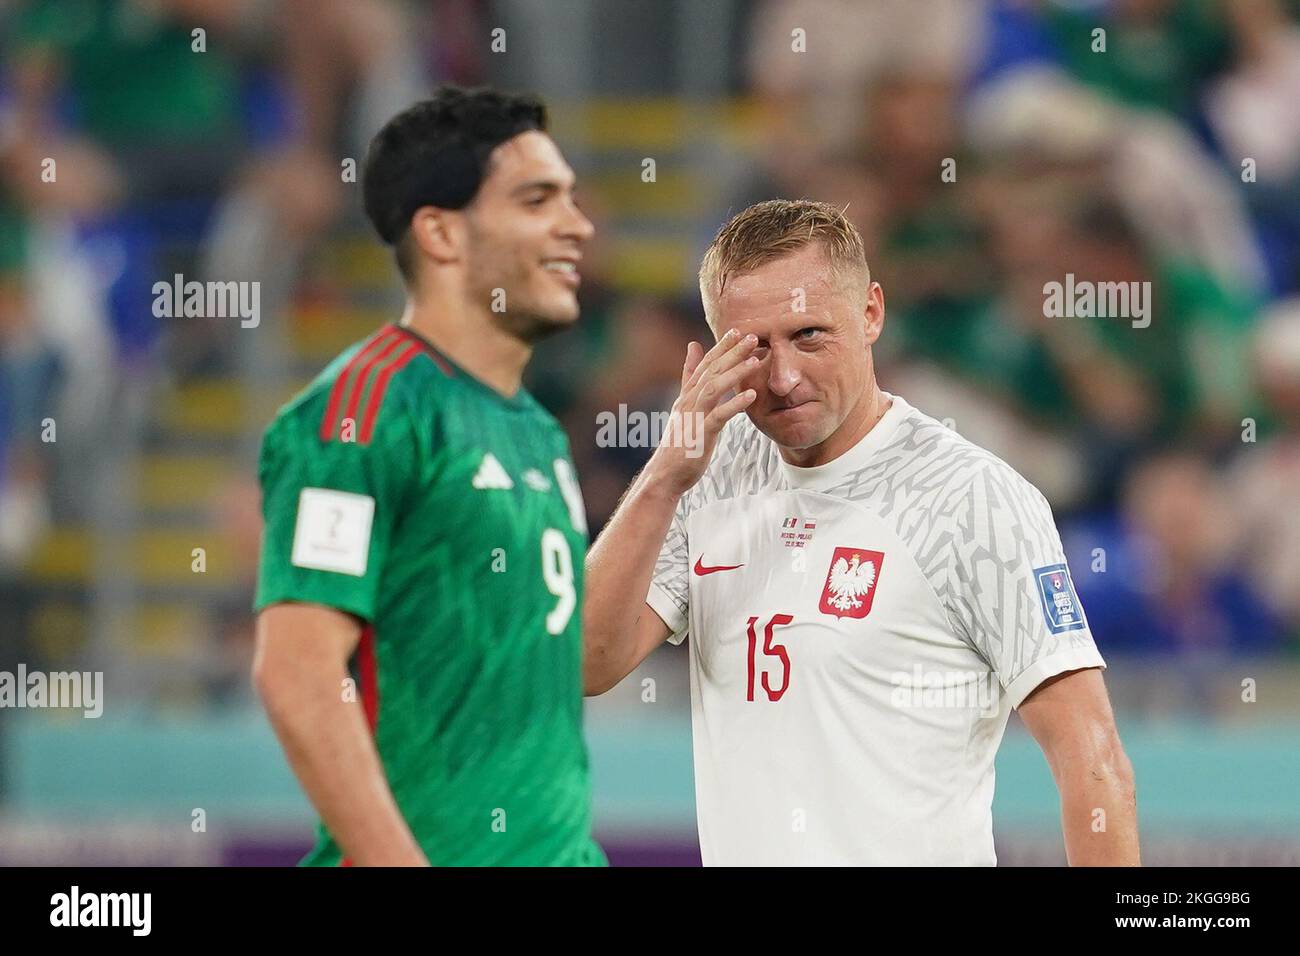 Doha, Qatar, 22nd November 2022.  Kamil Glik of Poland looks at Raul Jimenez of Mexico during the FIFA World Cup 2022 match at Stadium 974, Doha. Picture credit should read: Florencia Tan Jun / Sportimage Stock Photo